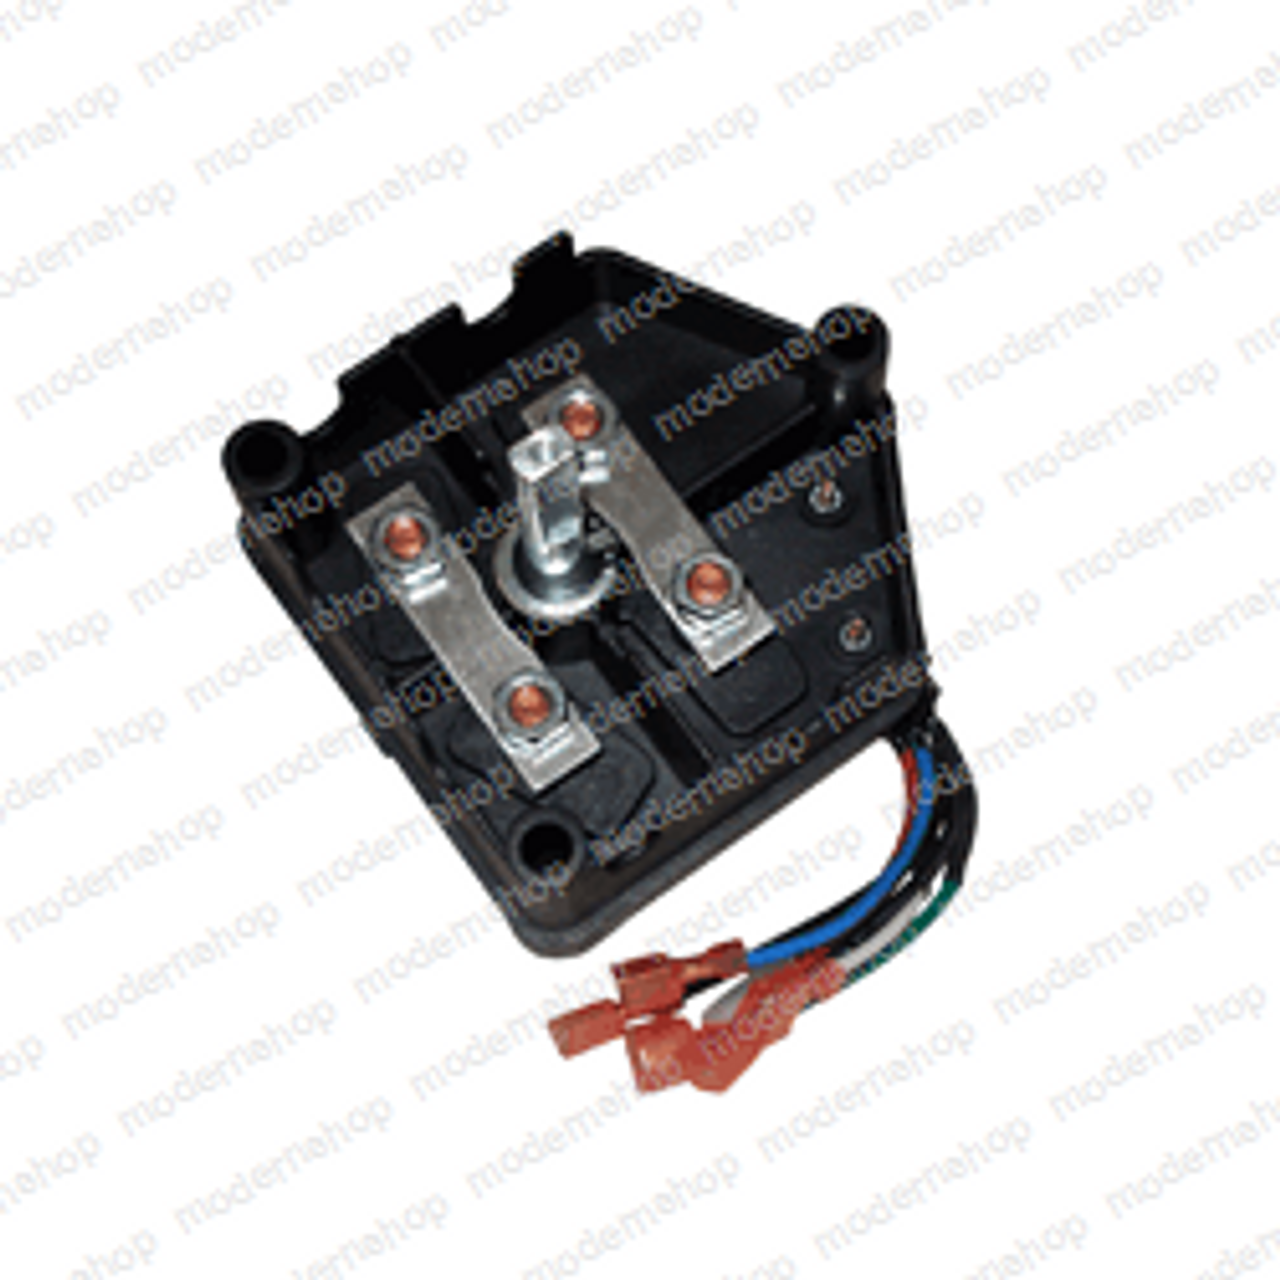 1017530-05: Cart-Parts SWITCH - FORWARD - REVERSE